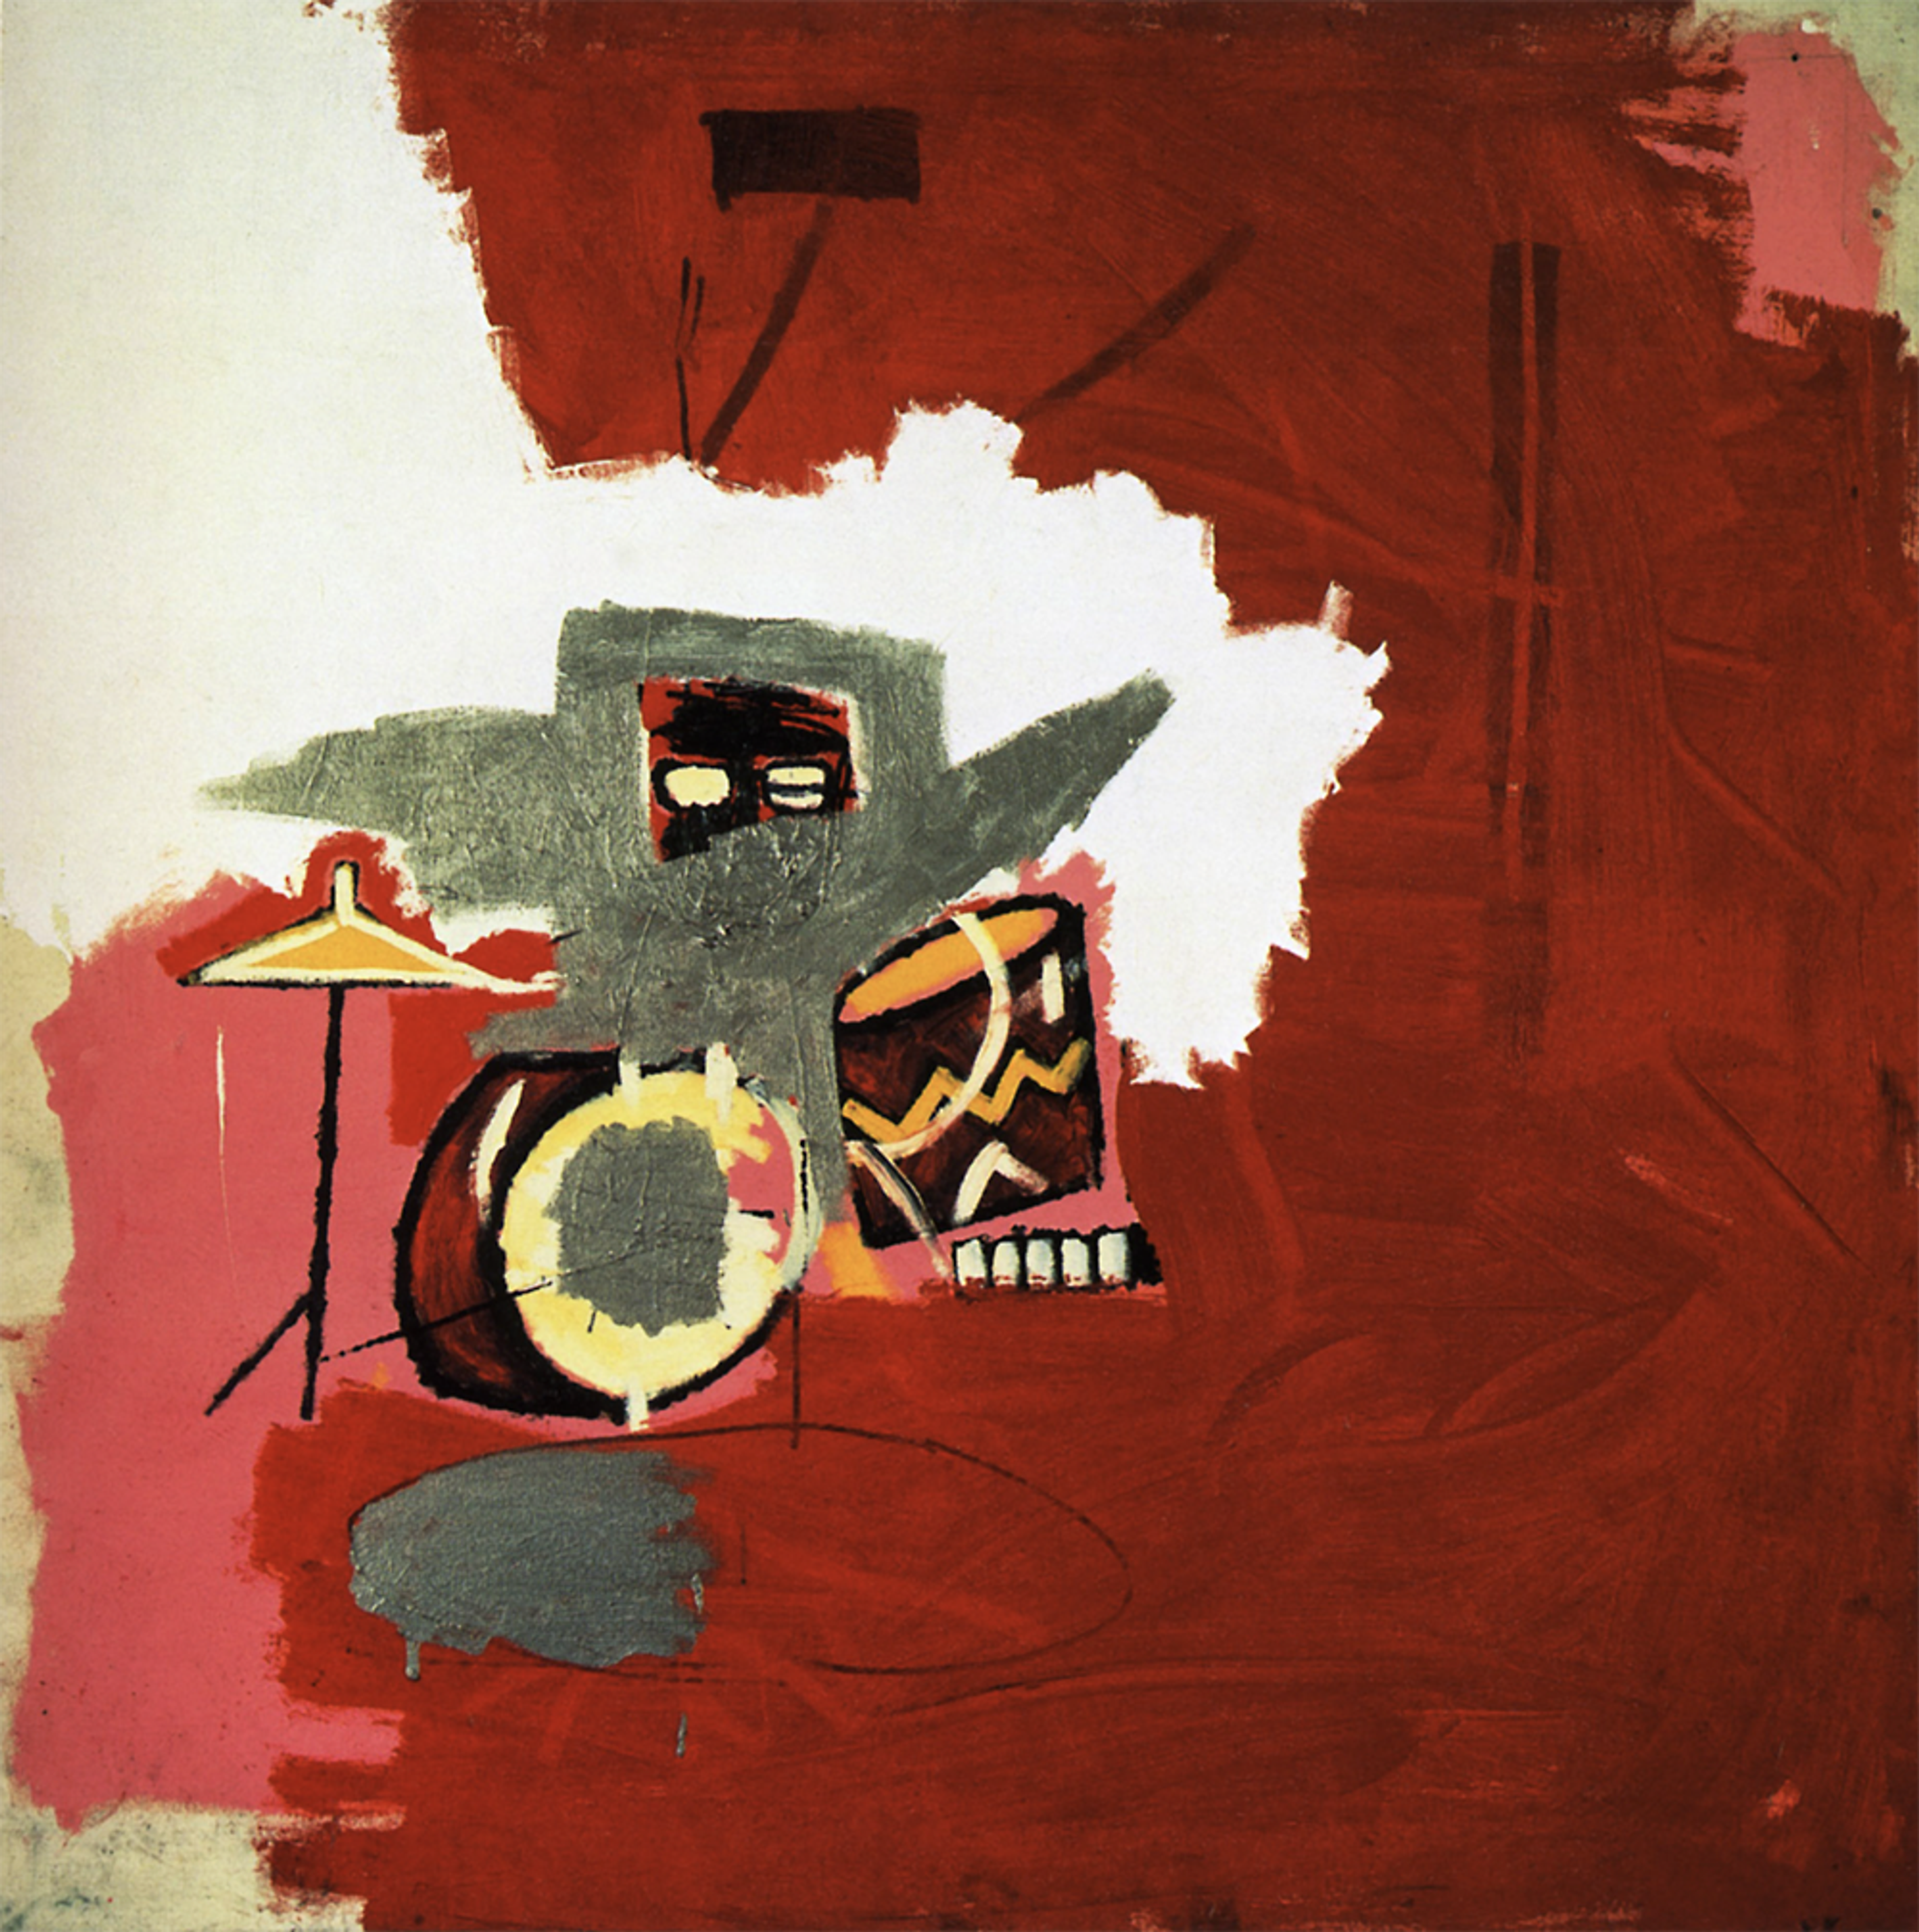 Jean-Michel Basquiat’s Max Roach. An abstract painting depicting percussionist Max Roach sitting at his drums in front of a predominantly red background.